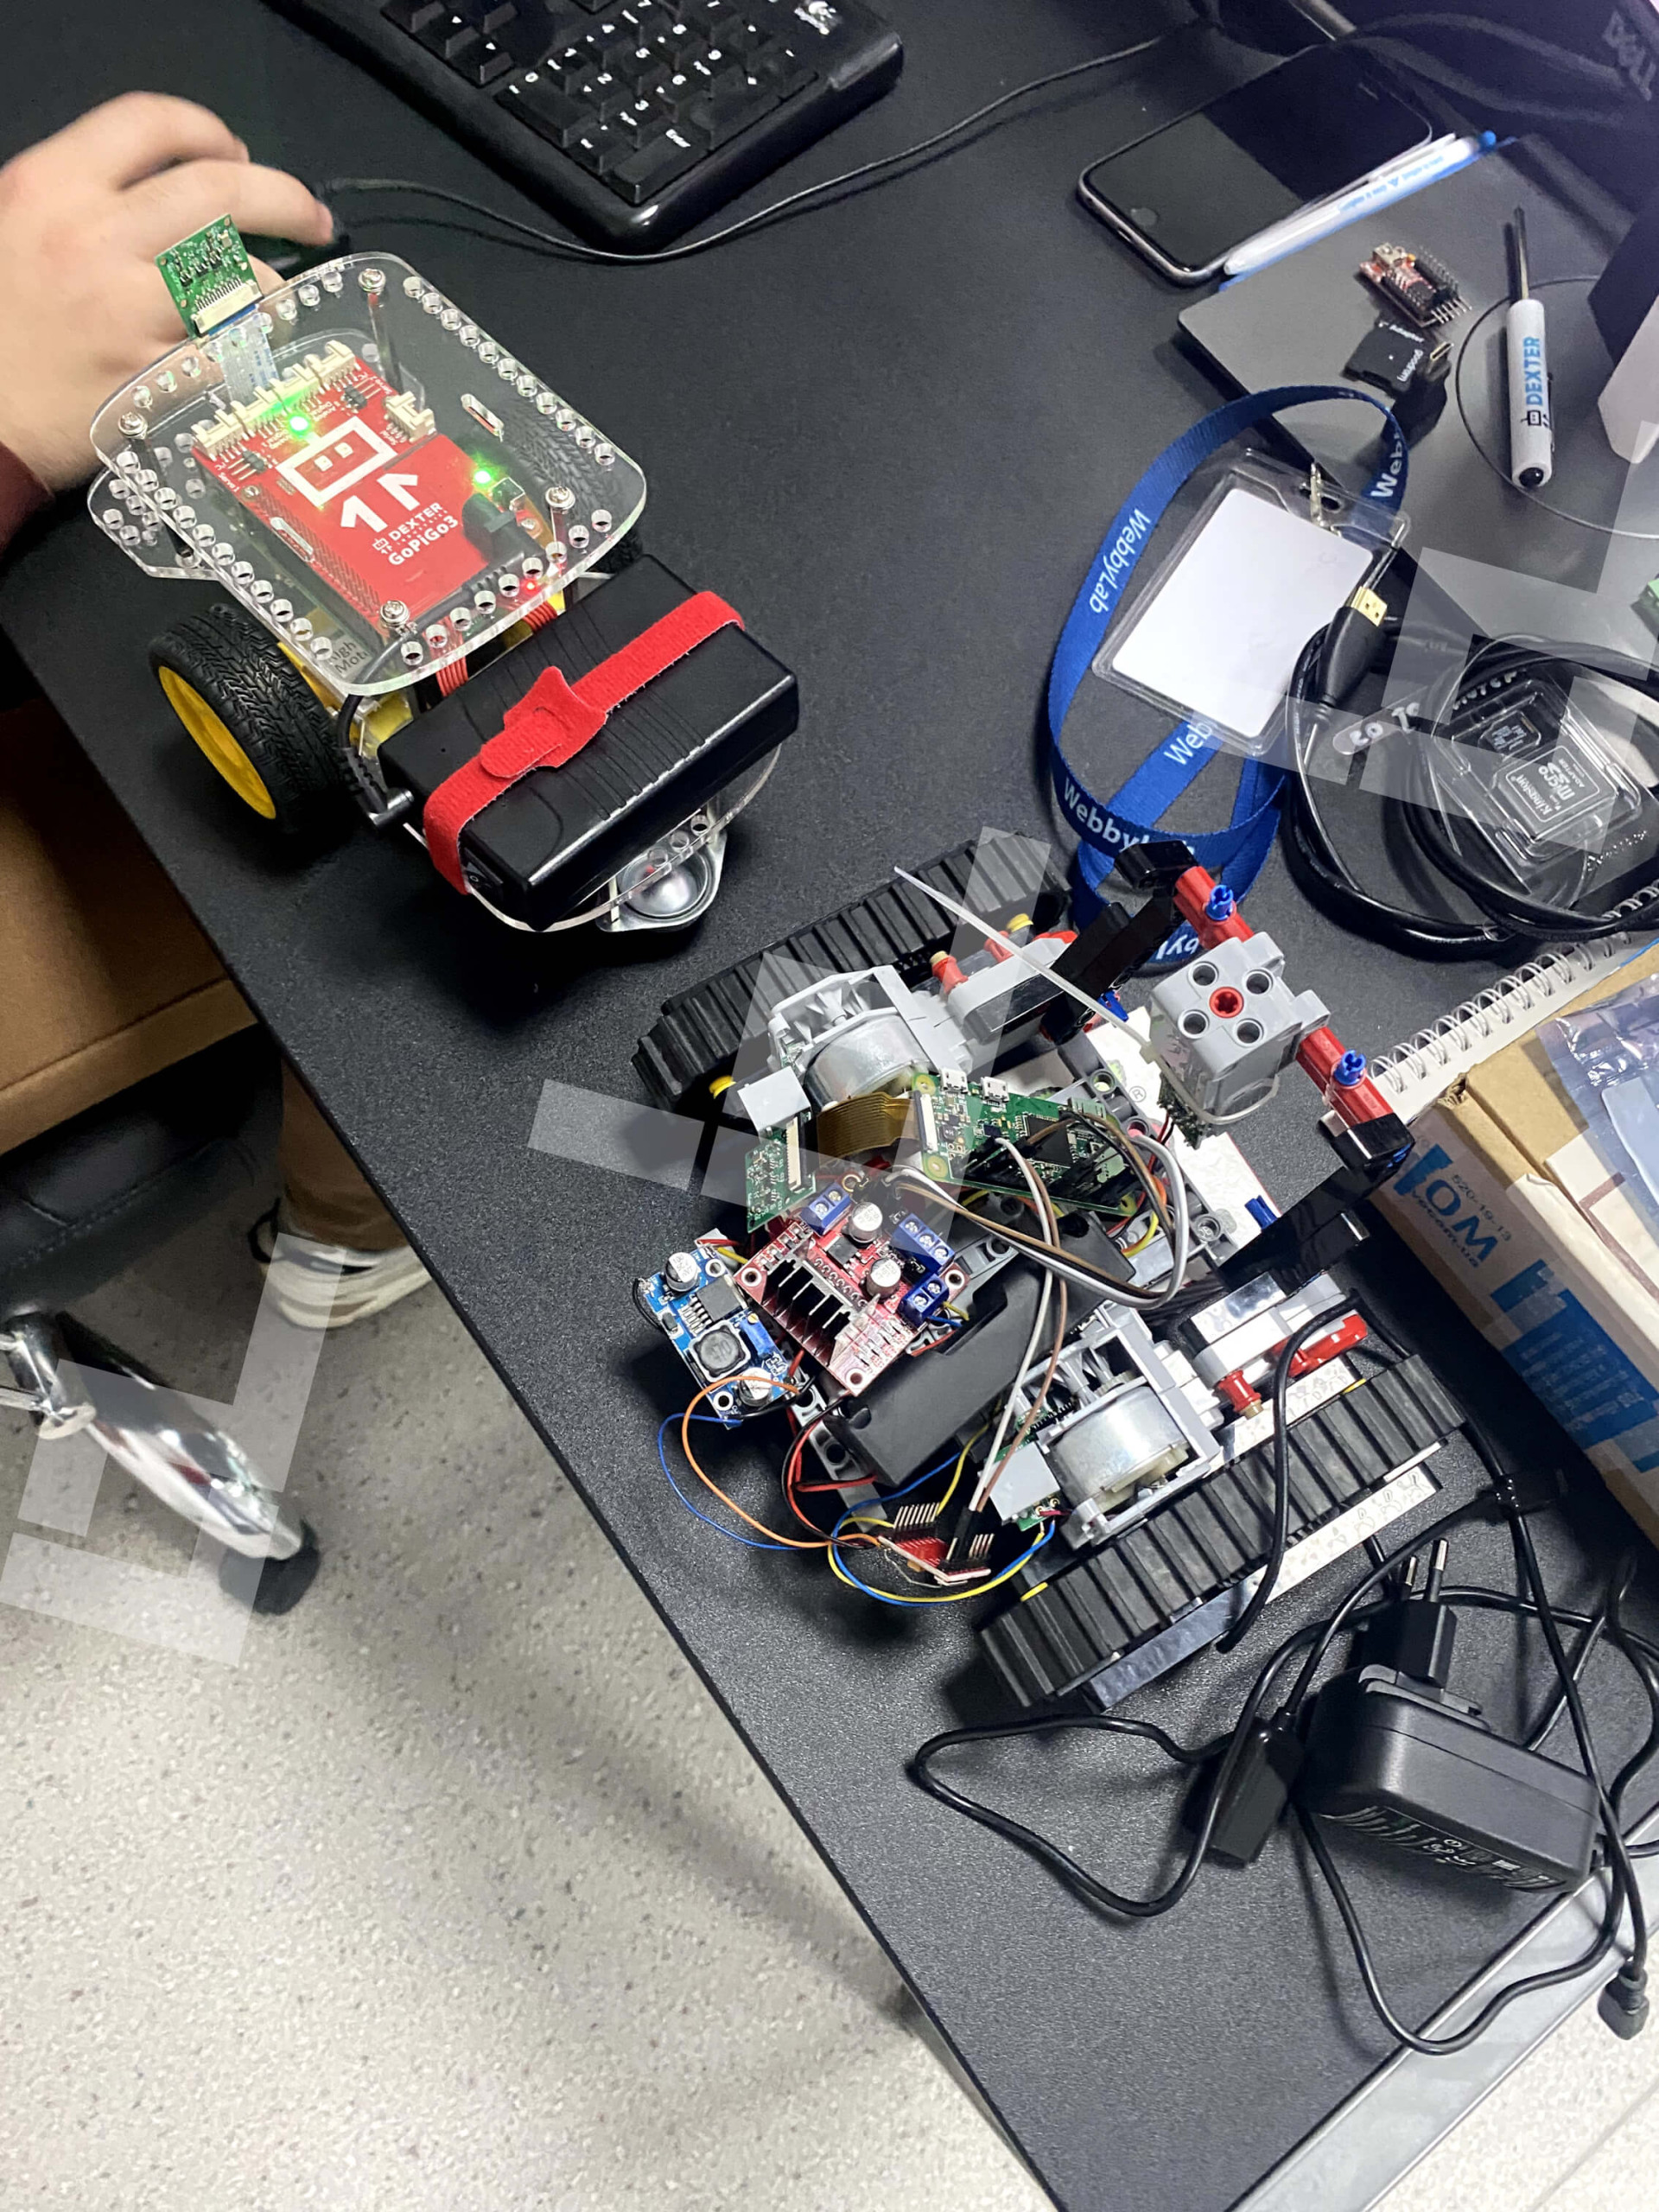 The WebbyLab team is working on the security robot prototype